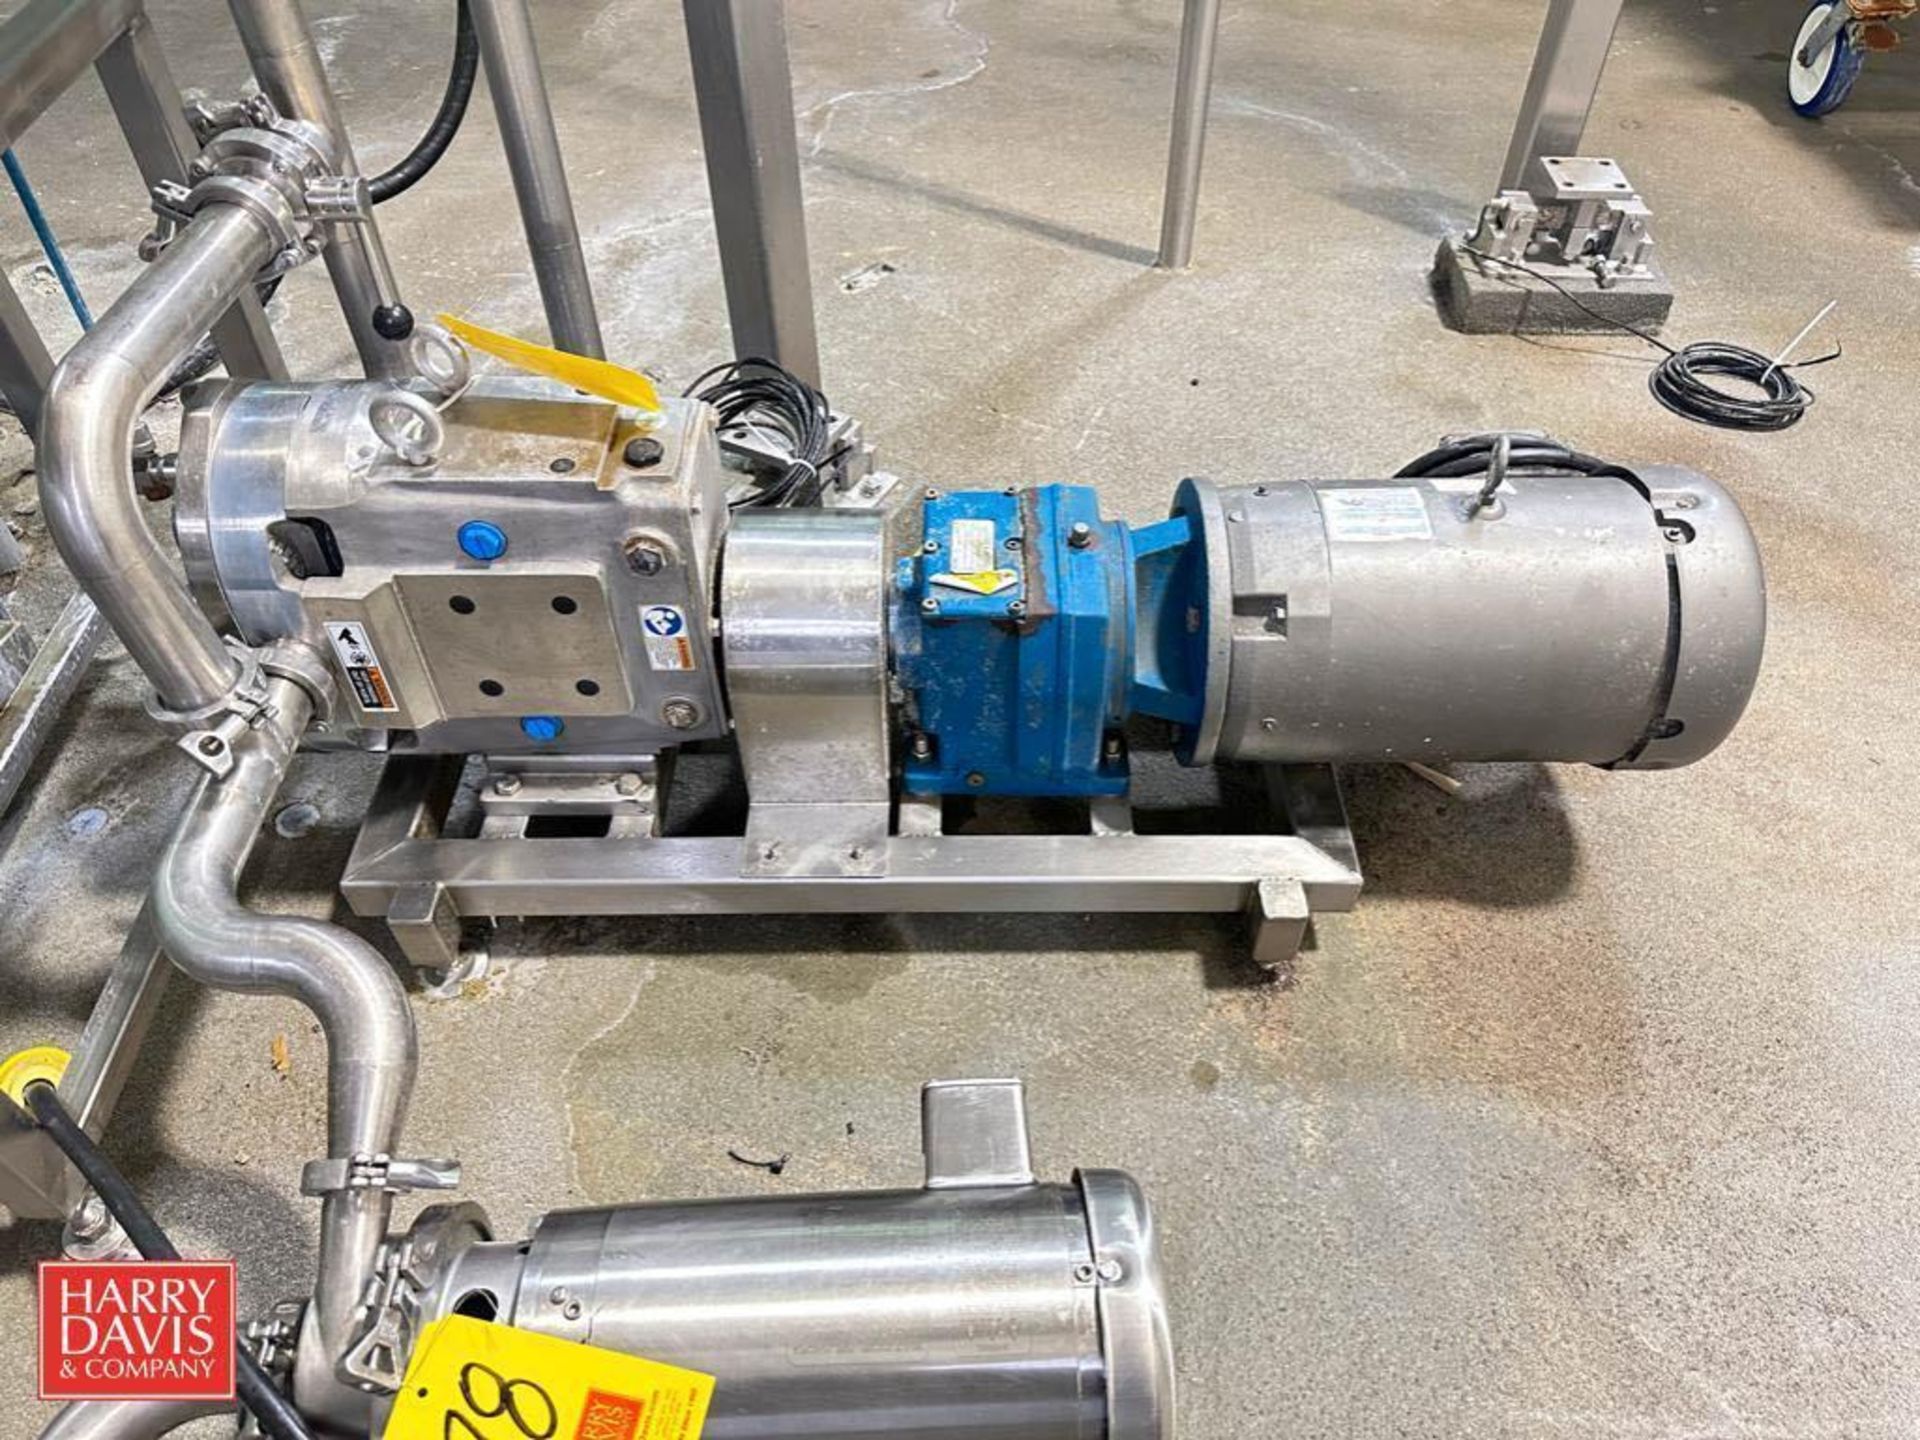 2017 SPX All S/S Positive Displacement Pump, Model: 045 U2, S/N: 1000003302967 with Baldor S/S Clad - Image 2 of 3